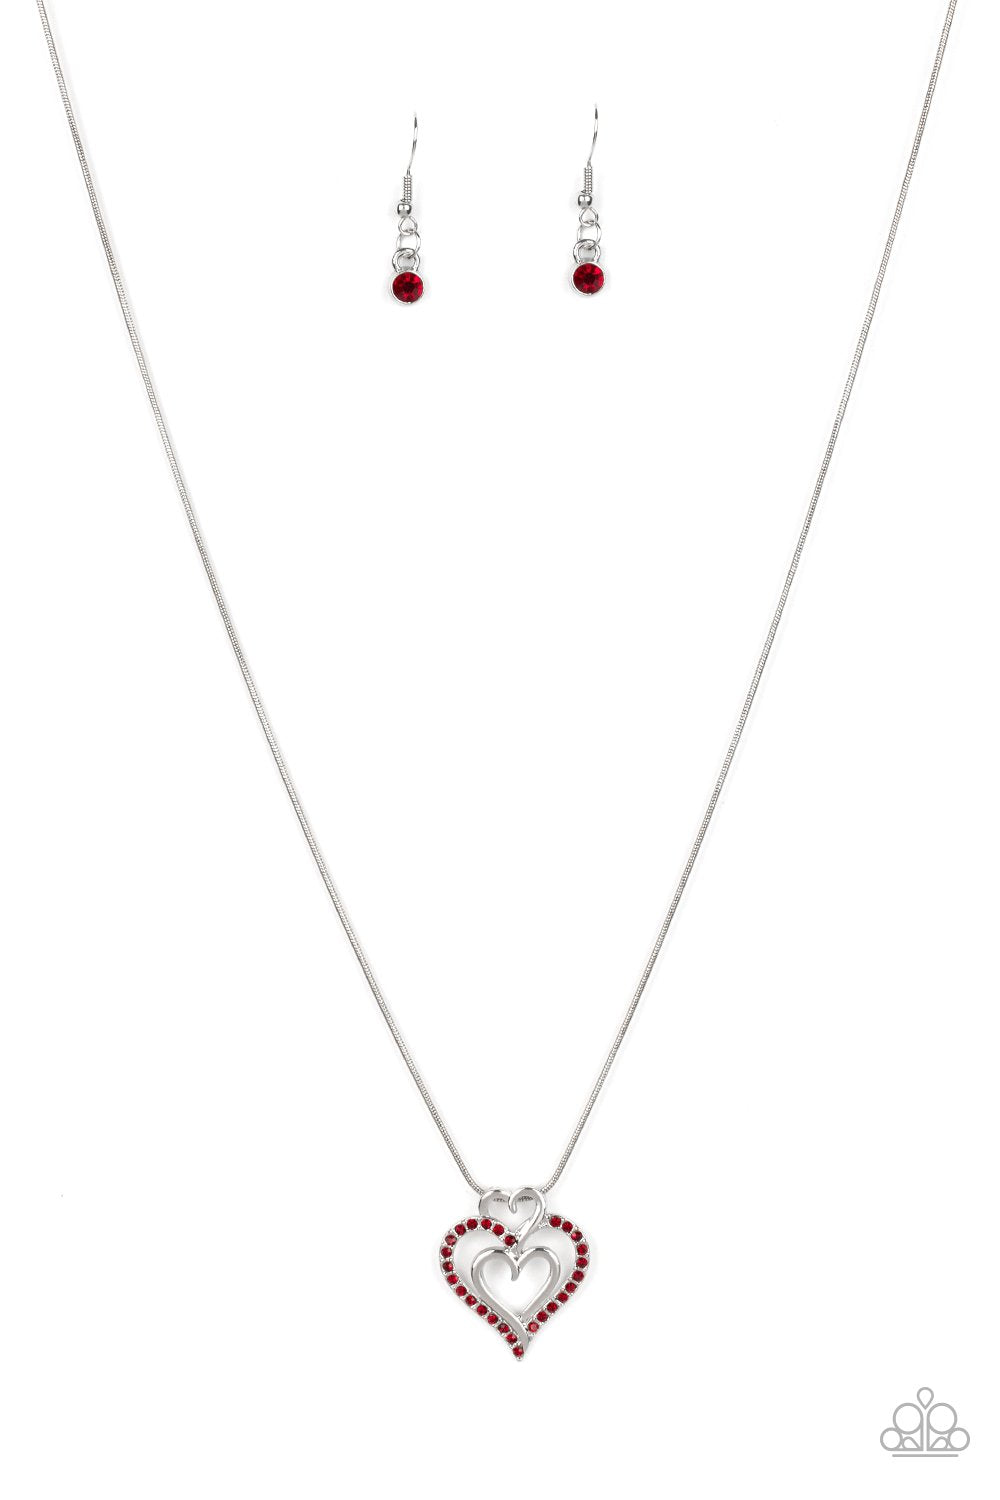 Triple the Beat-red-Paparazzi necklace